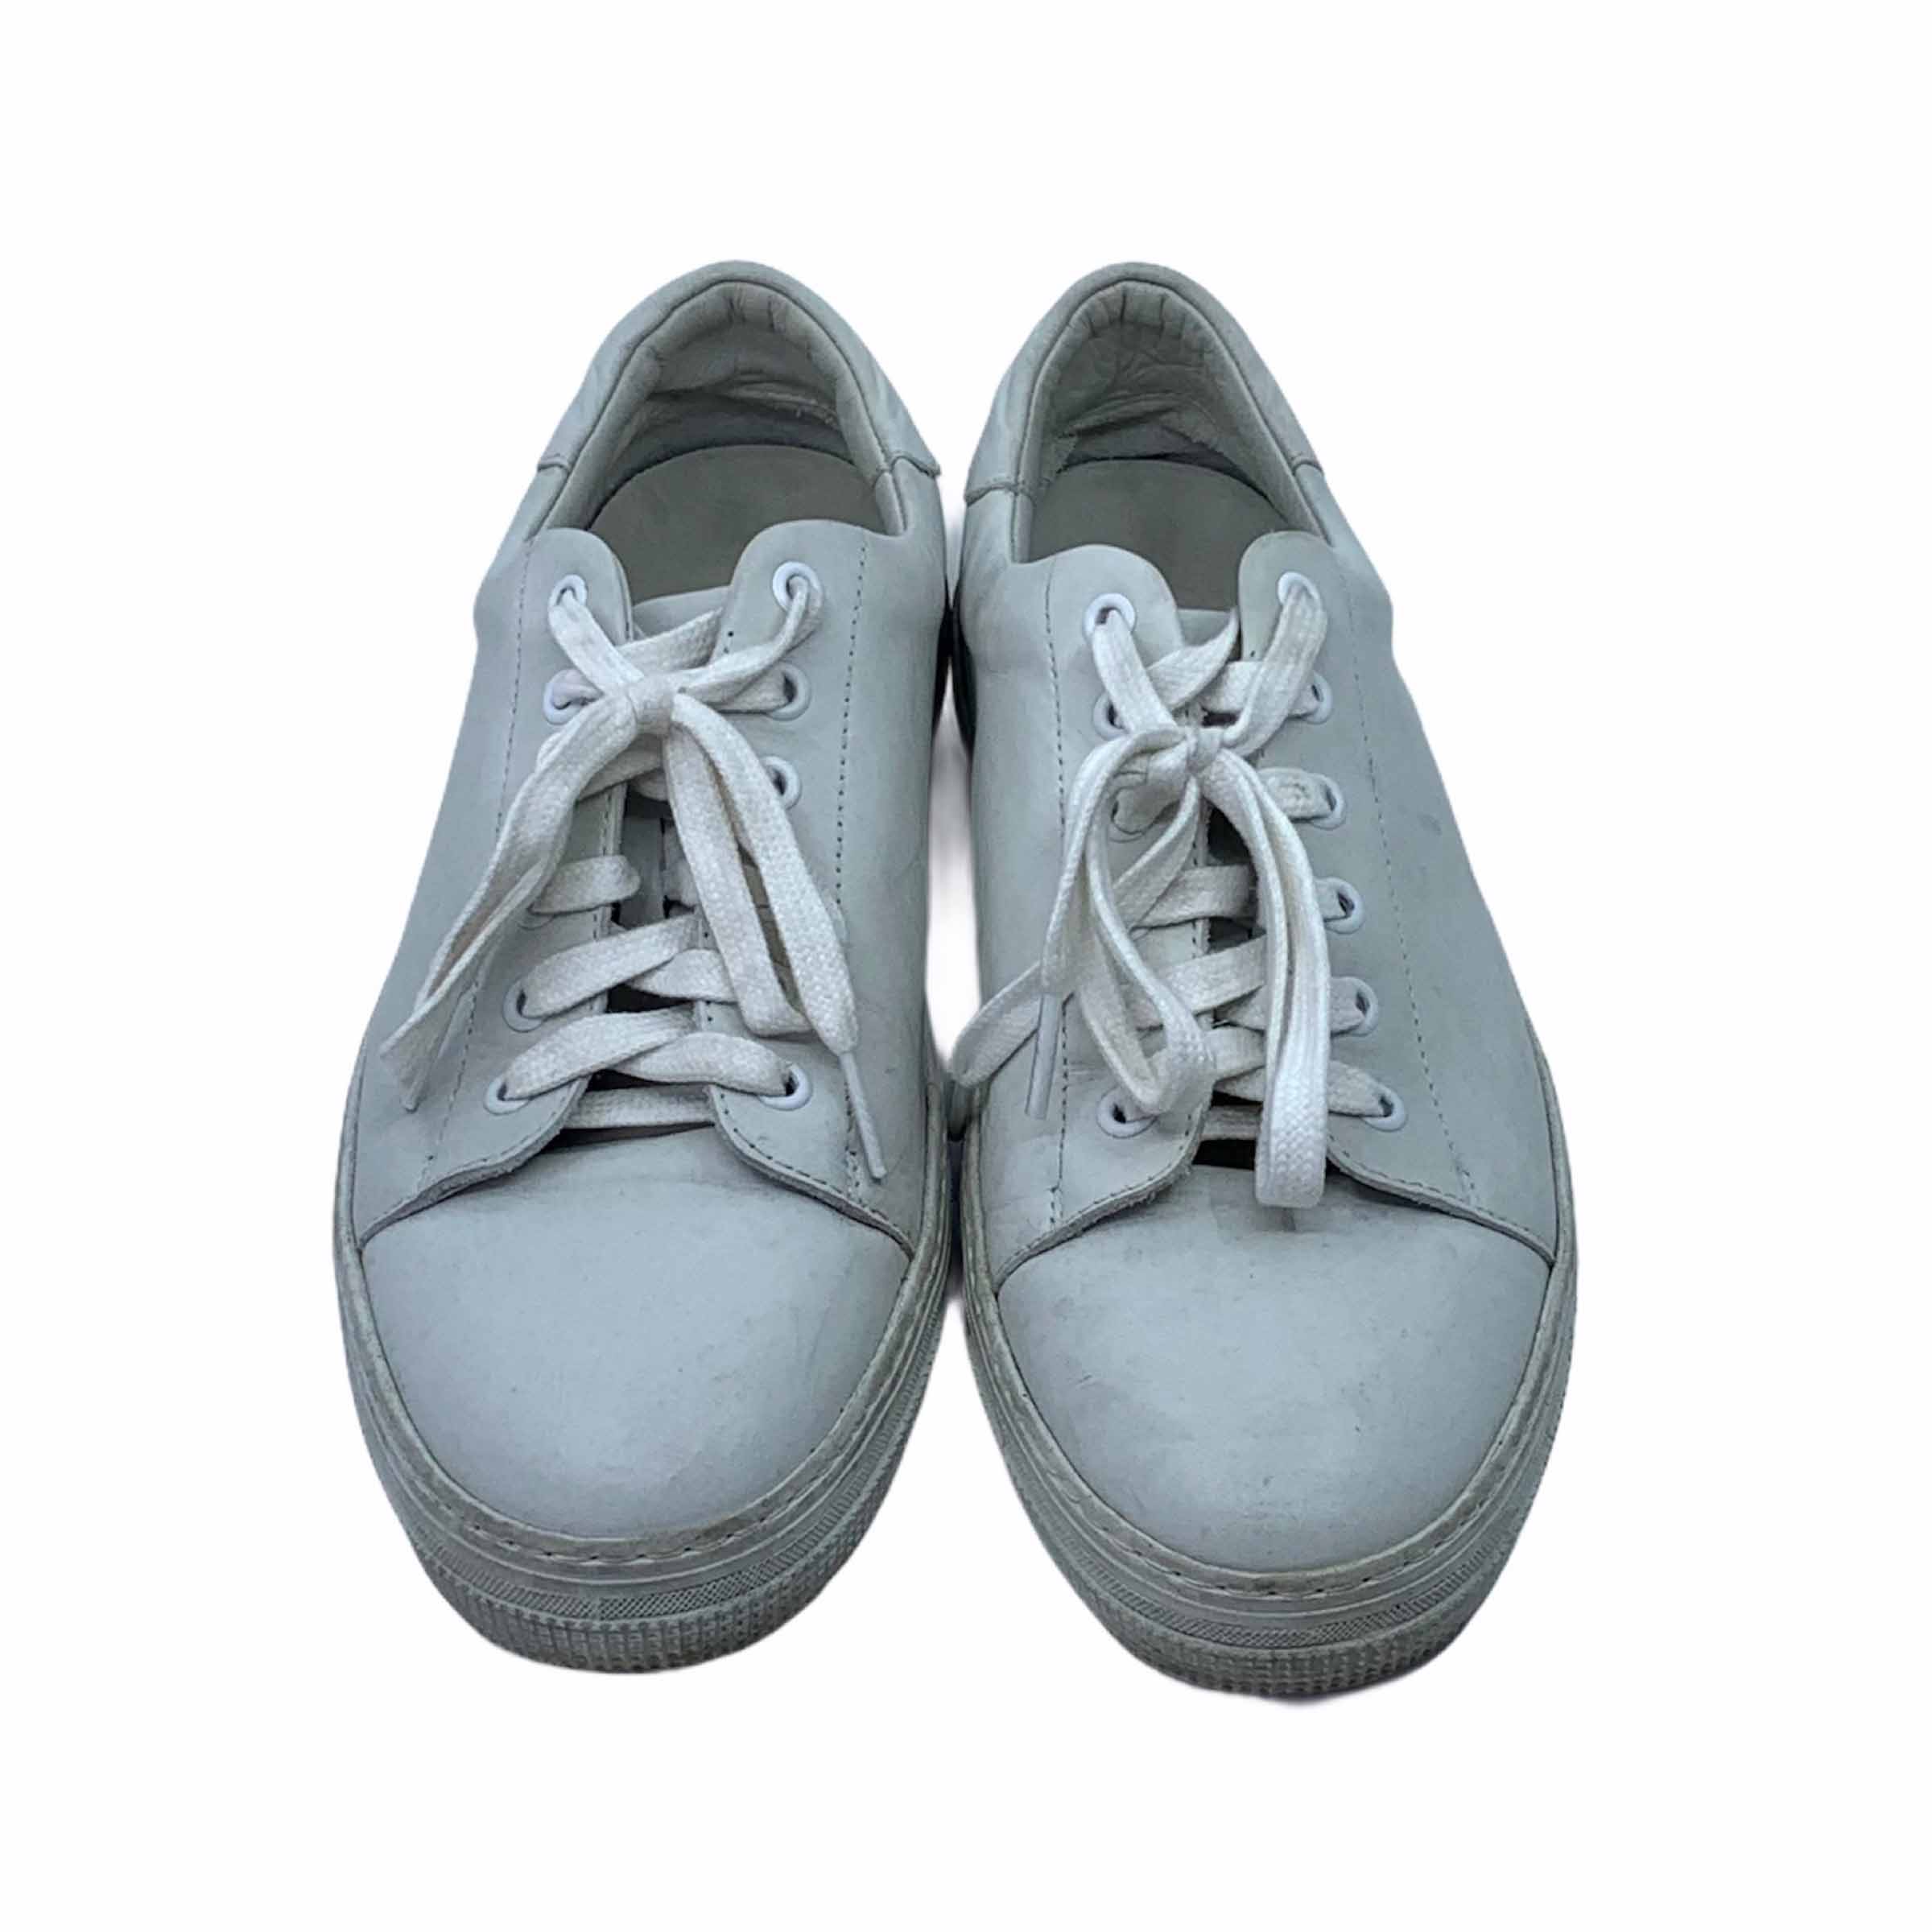 [A.P.C] Lowtop Tennis Sneakers (Off-White) - Size EUR41